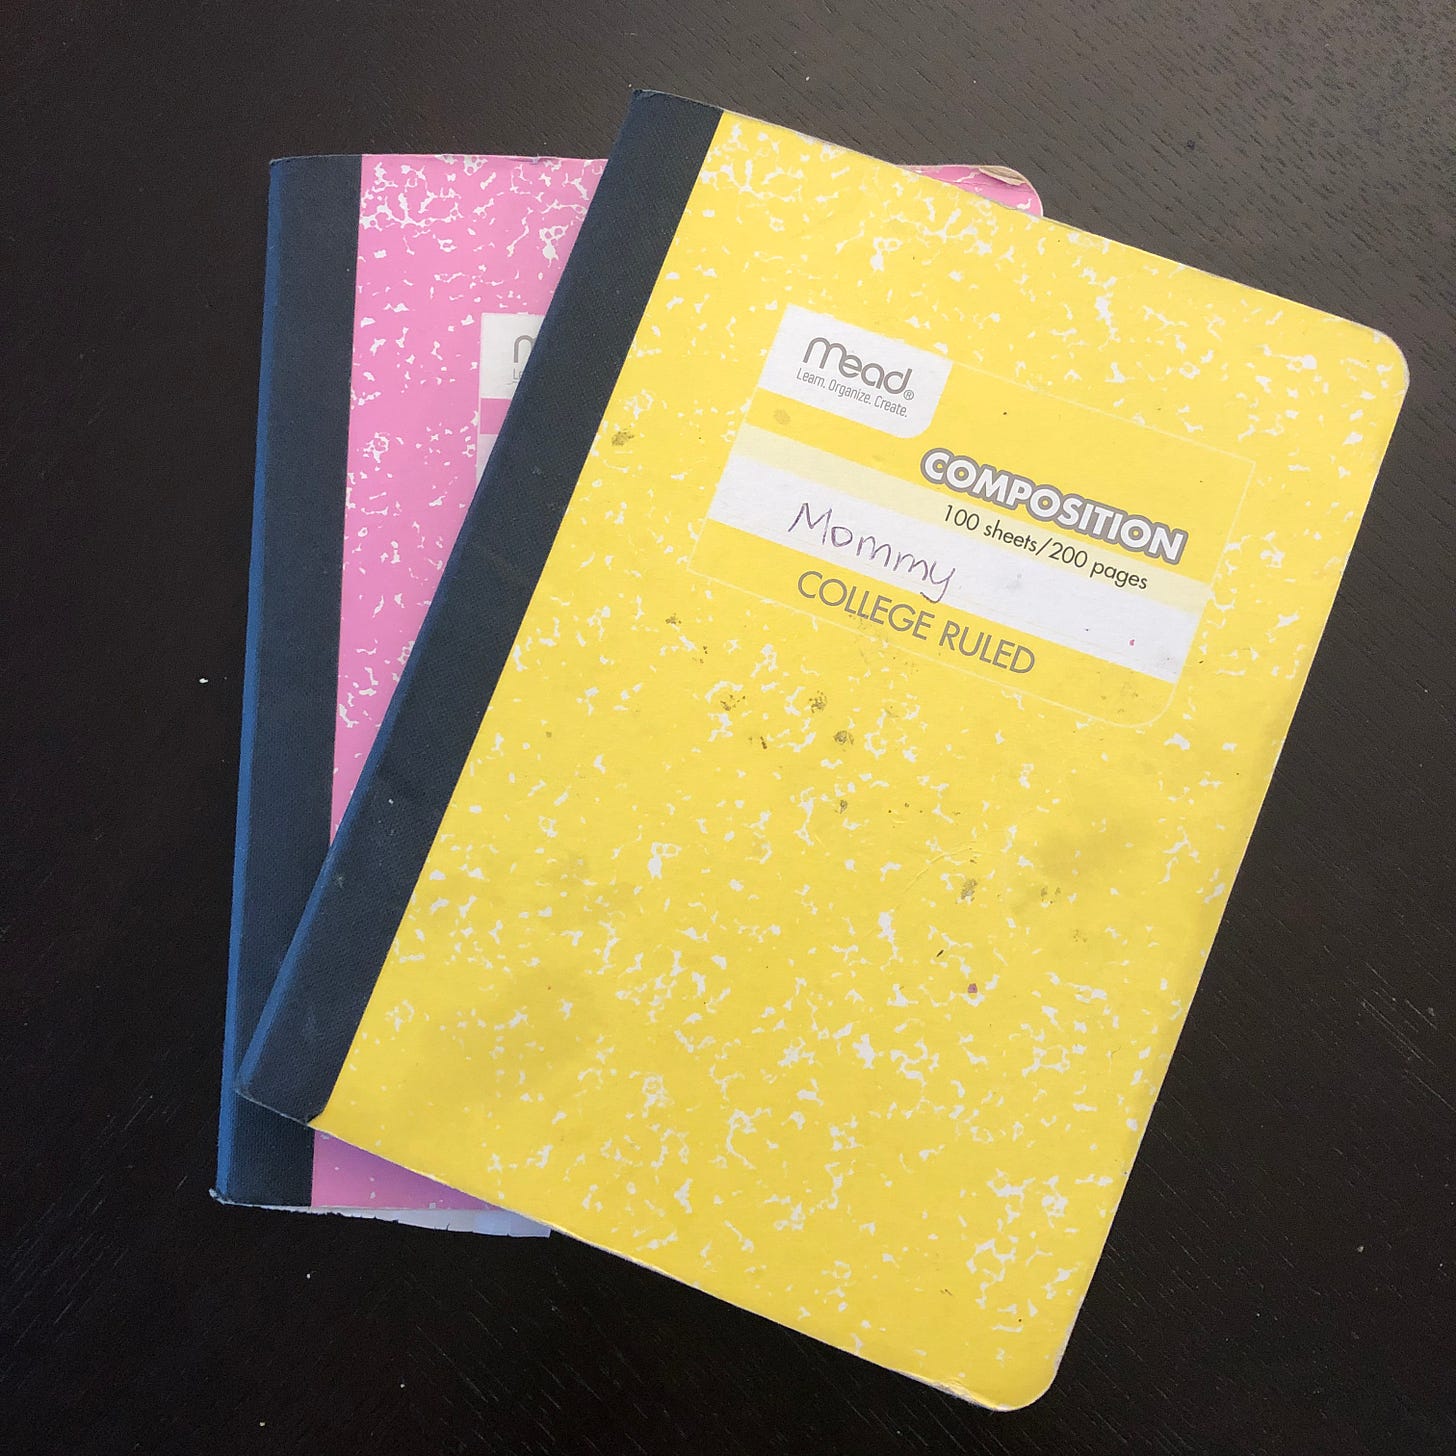 two composition notebooks, one pink and one yellow, labeled "Mommy"